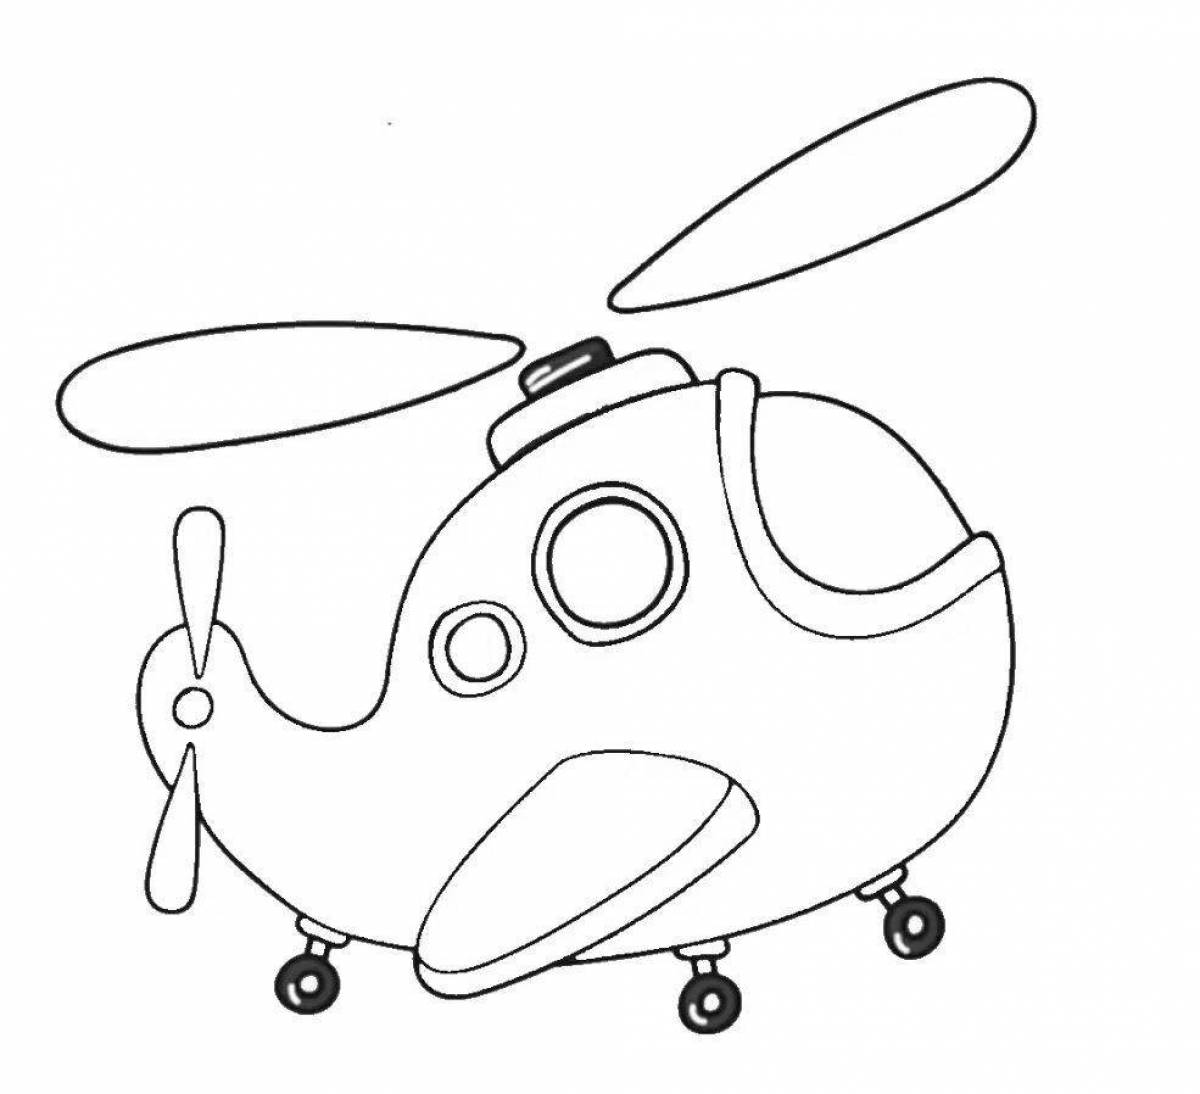 Great helicopter coloring book for babies